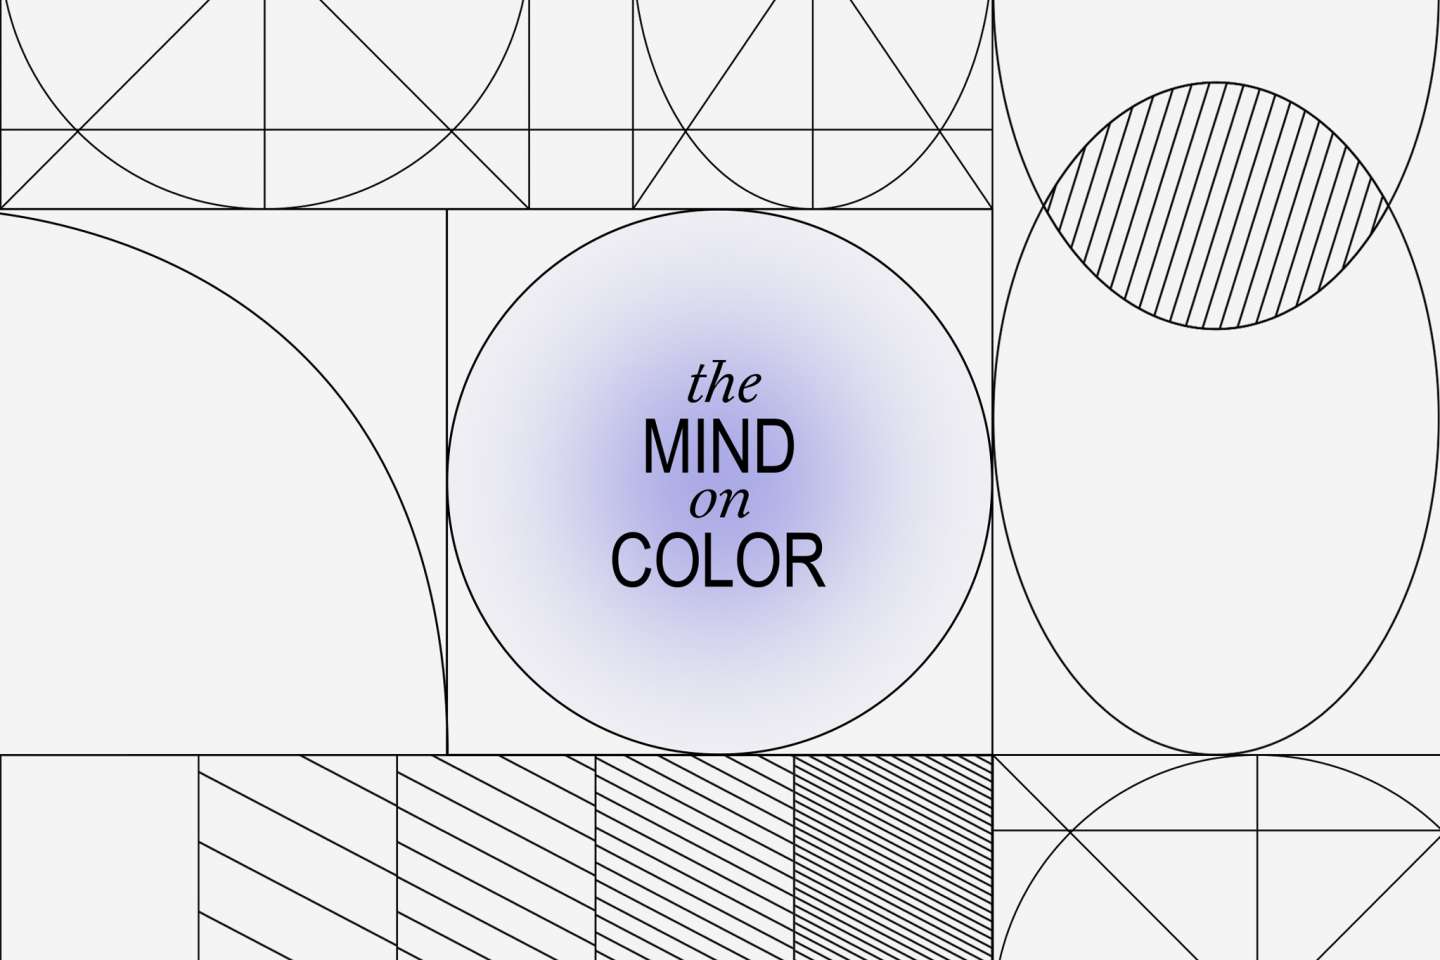 The Mind on Color